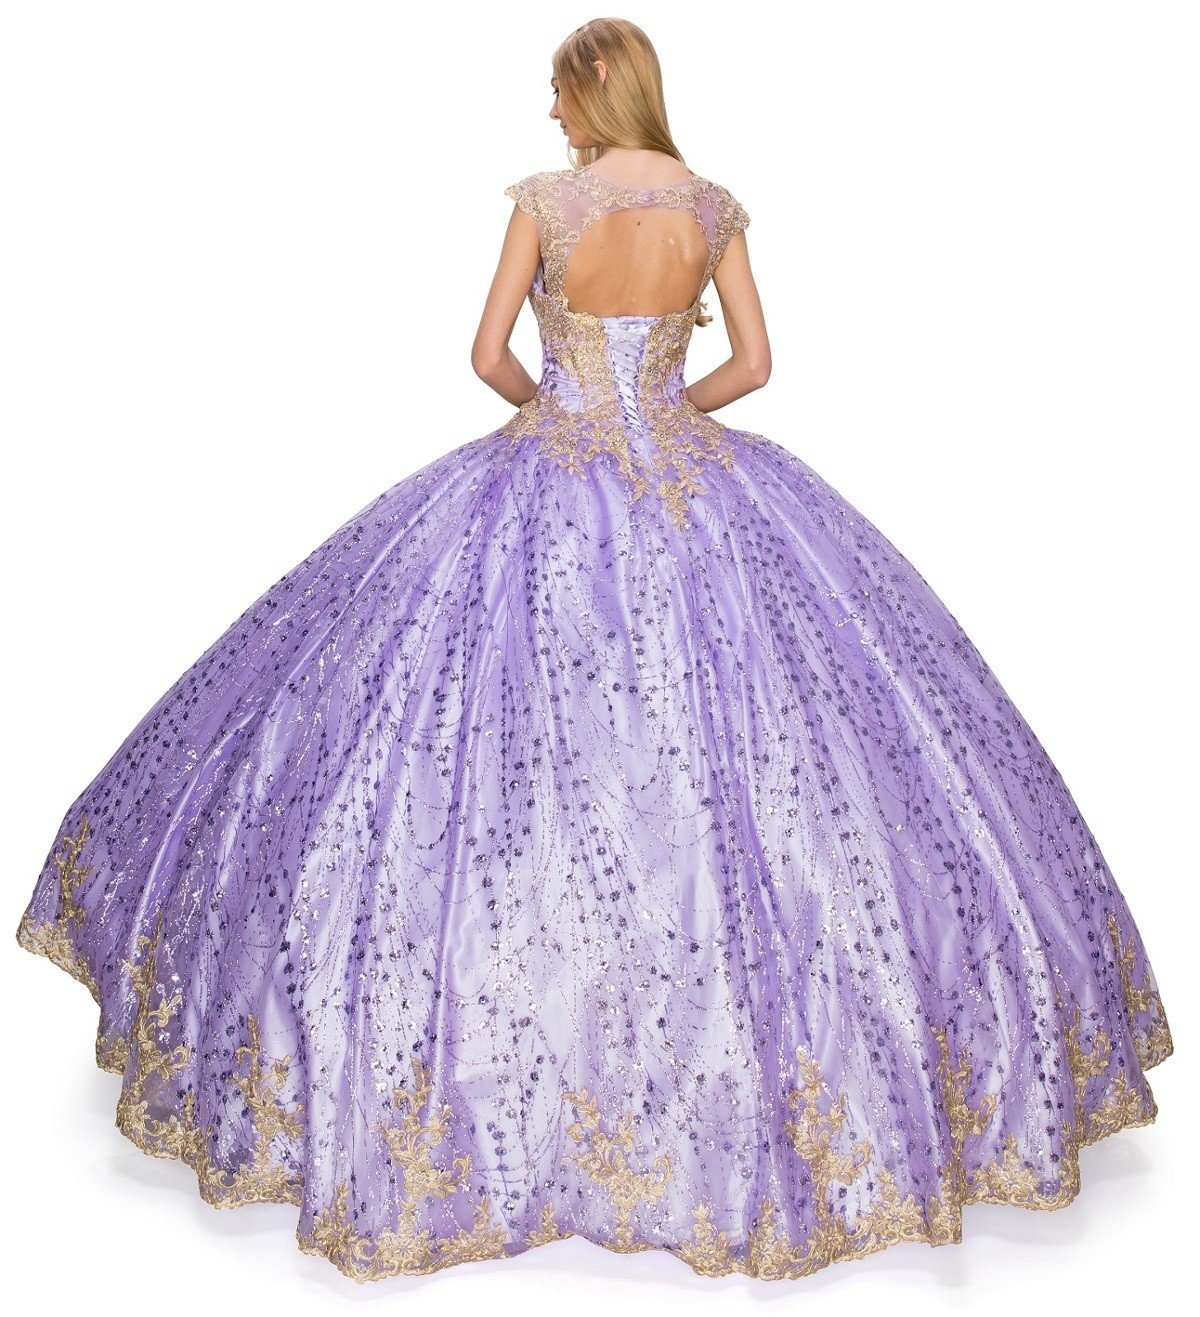 Glitter Satin Tulle Quinceanera Dress Cinderella Couture USA AS8024J-lilac